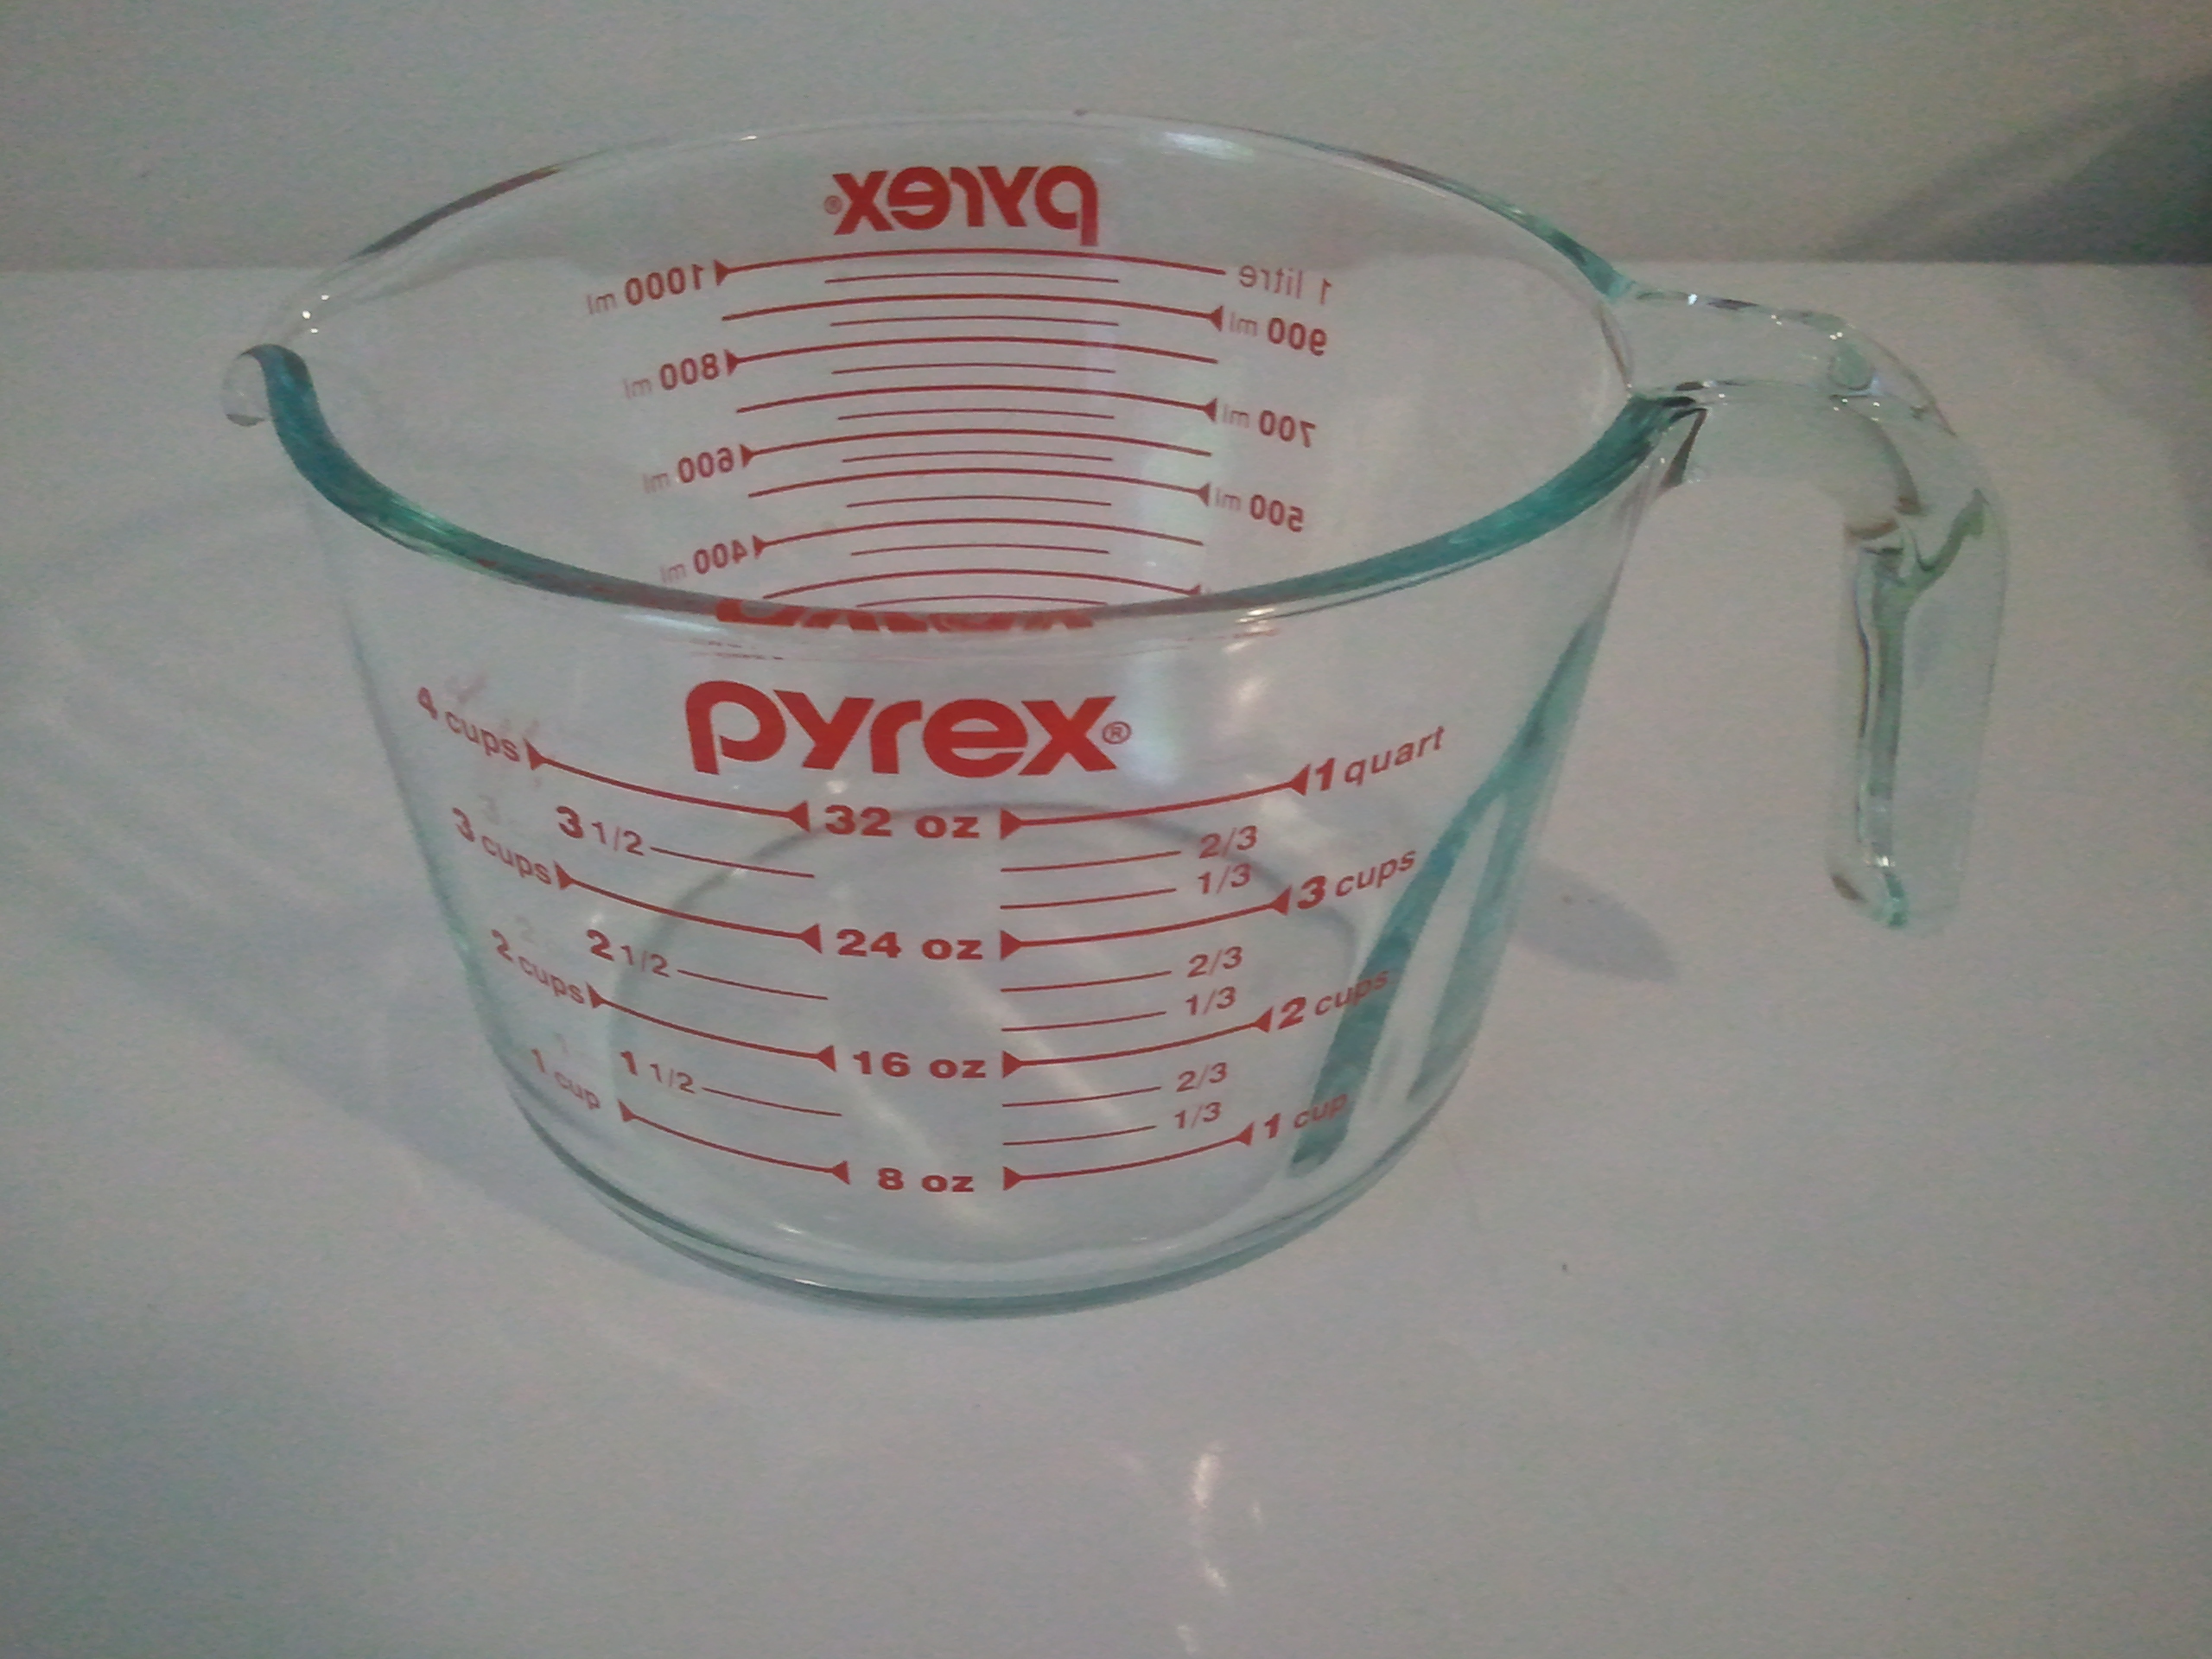 Pyrex Glass Measuring Cups for Baking and Cooking